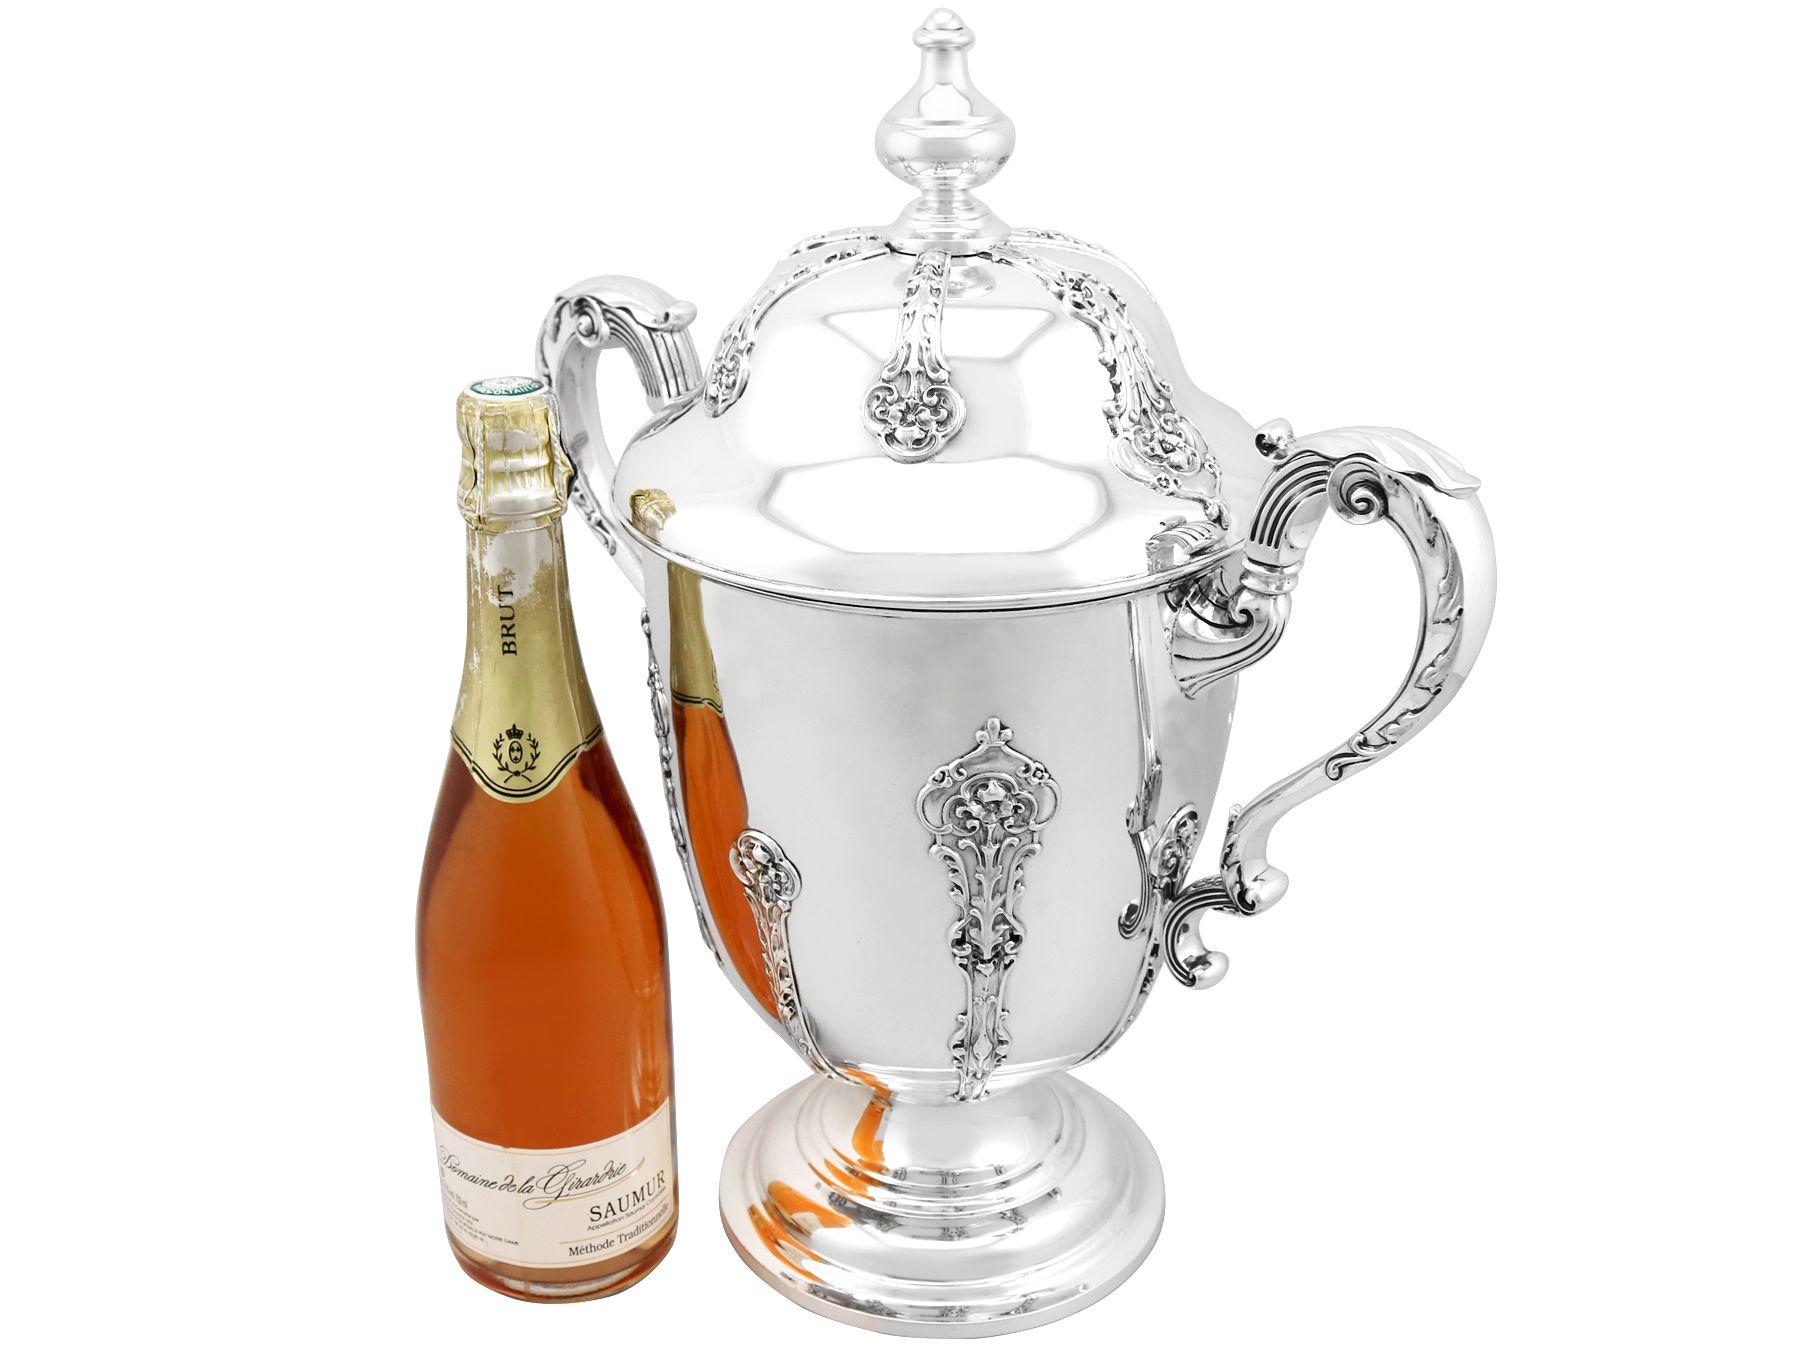 A magnificent, fine and impressive, large antique George V English sterling silver presentation cup with cover made by goldsmiths and silversmiths Co Ltd; an addition to our presentation silverware collection.

This exceptional antique sterling